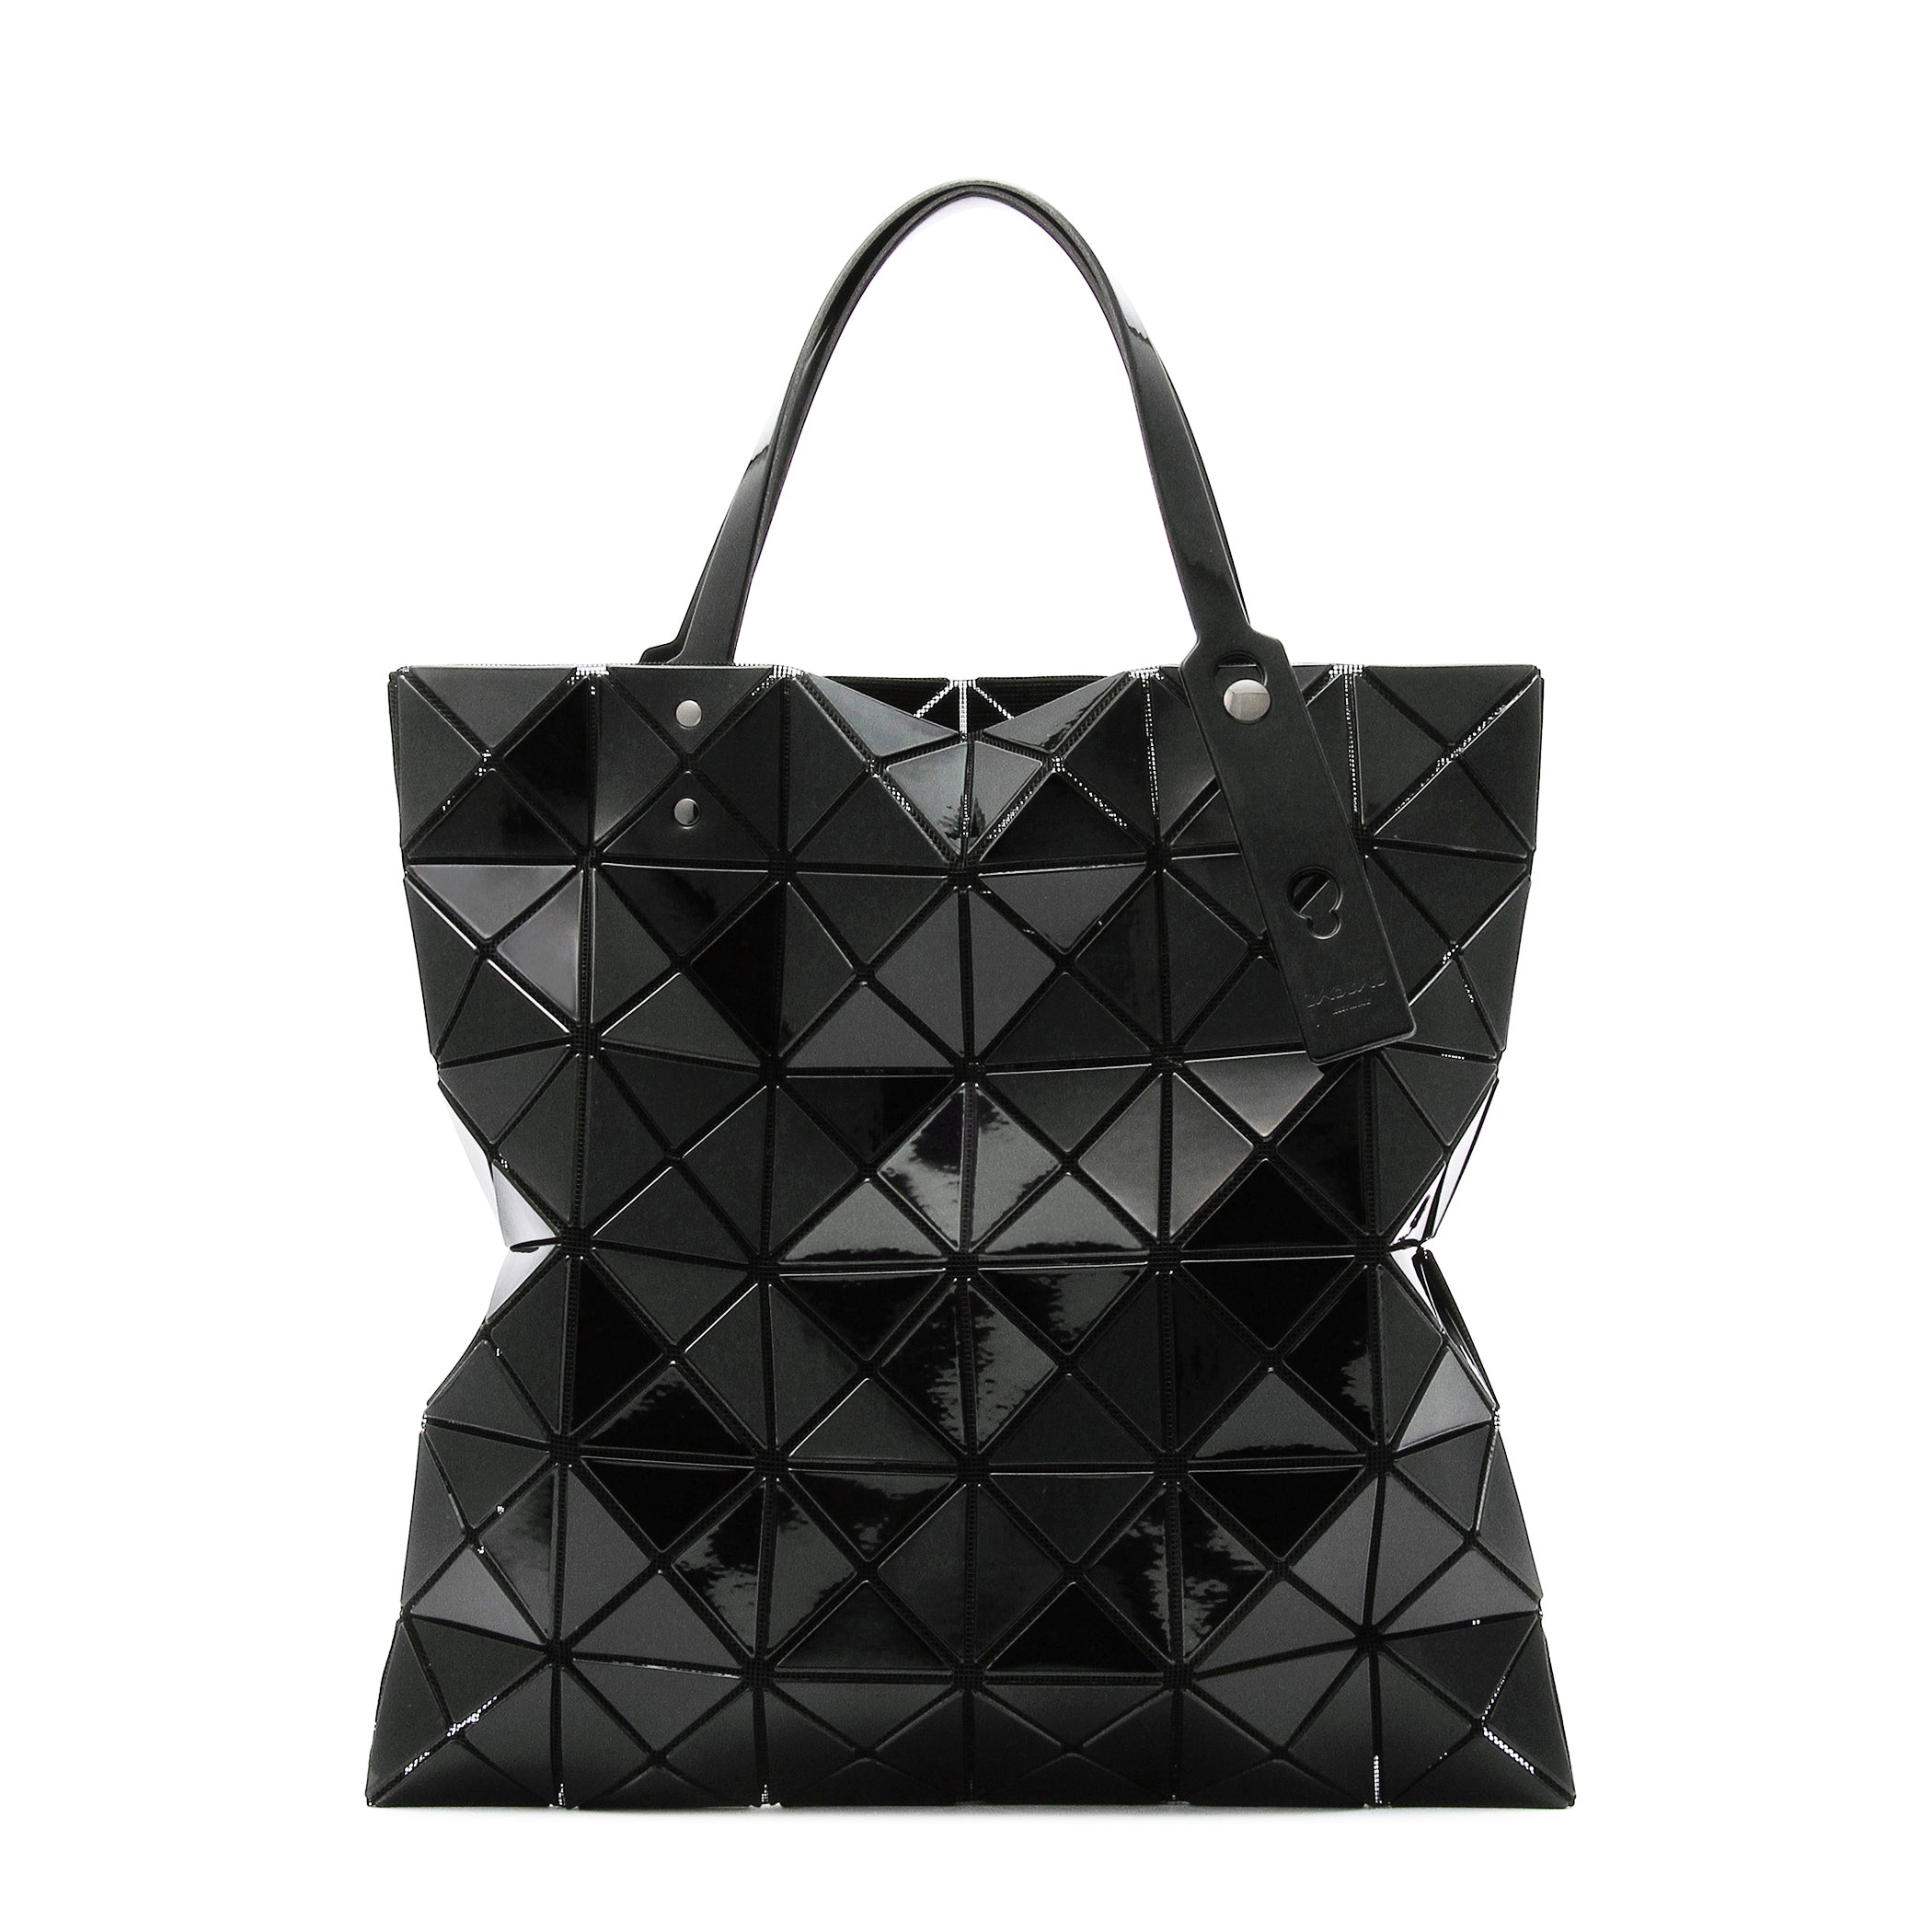 LUCENT Tote Black | ISSEY MIYAKE ONLINE STORE UK